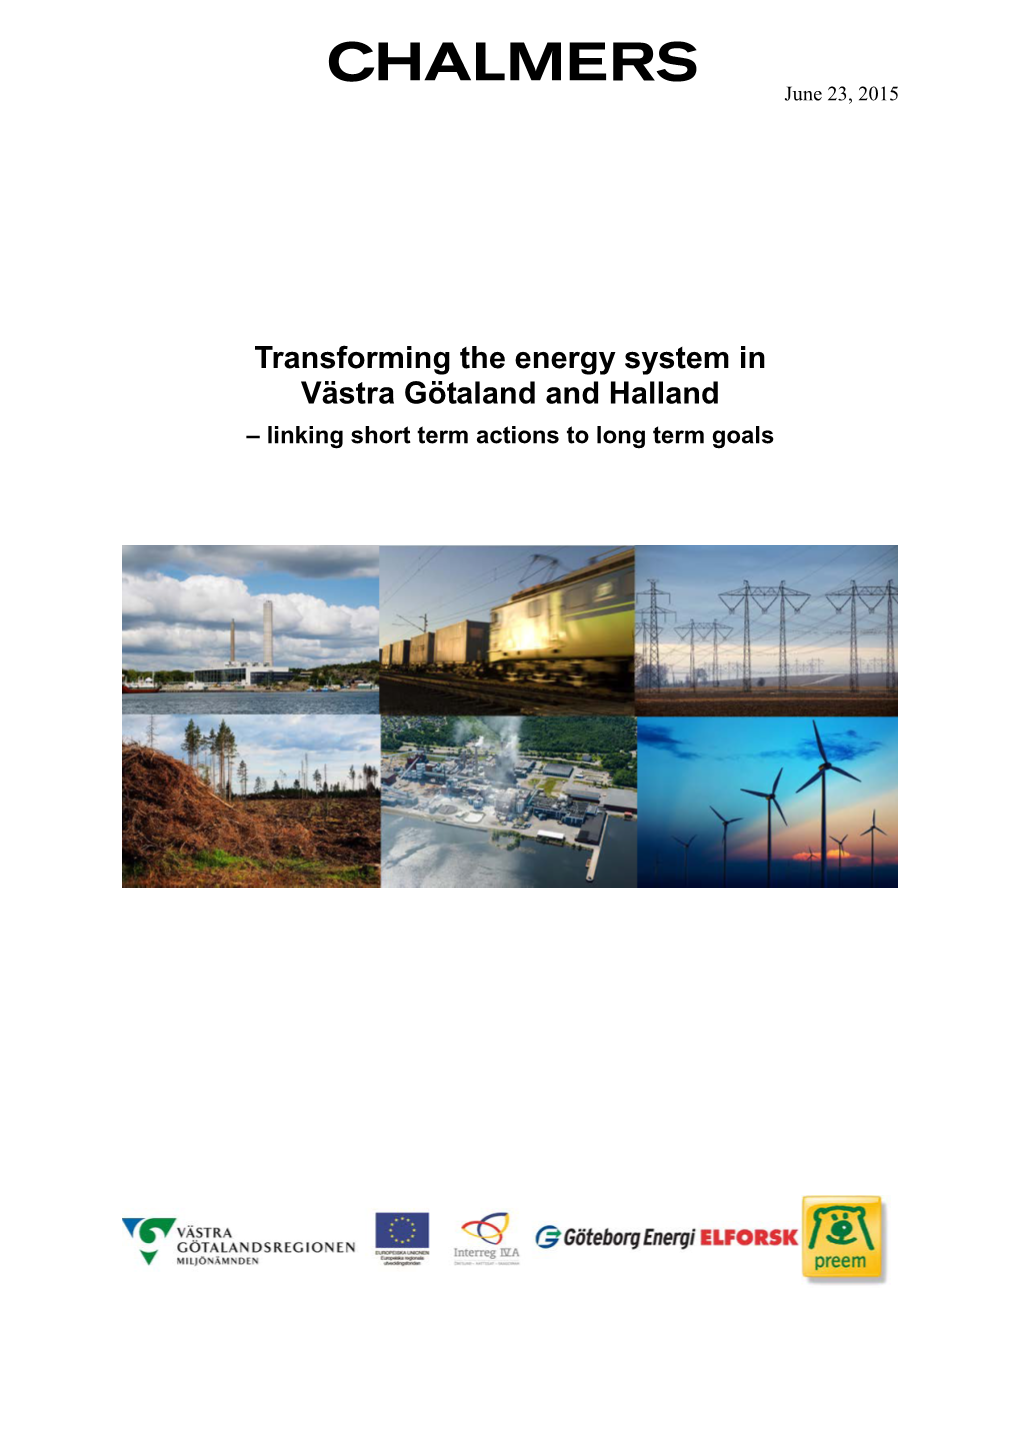 Transforming the Energy System in Västra Götaland and Halland – Linking Short Term Actions to Long Term Goals